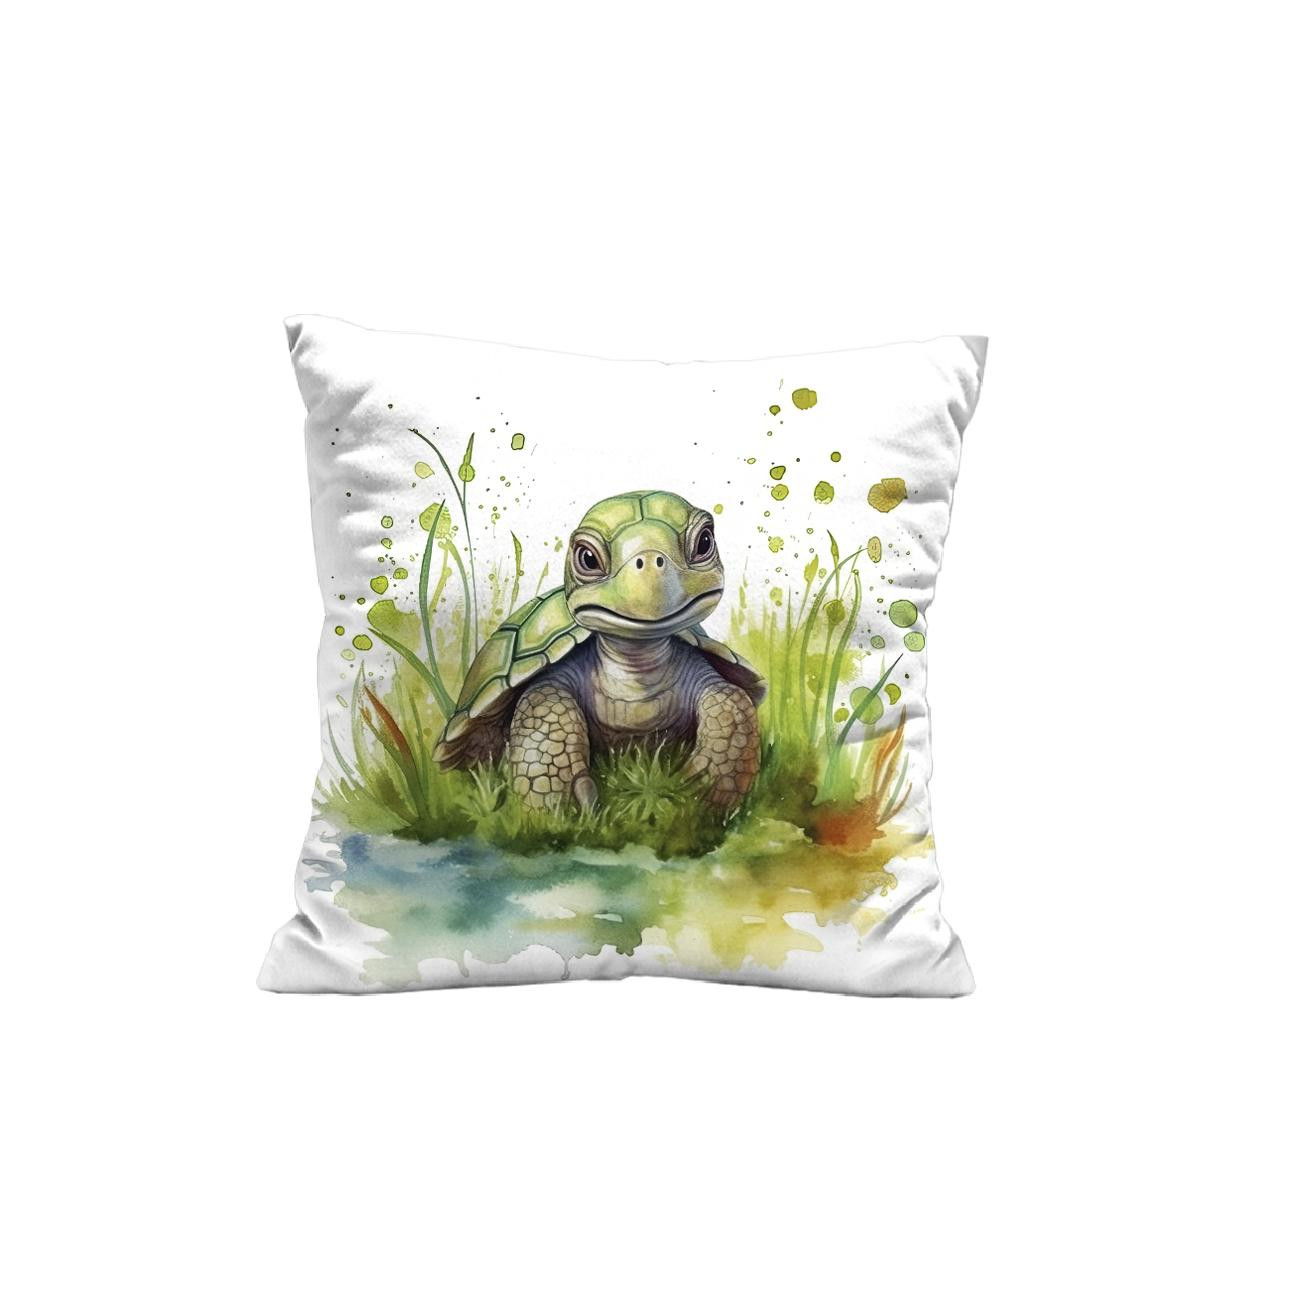 PILLOW 45X45 - WATERCOLOR TORTOISE - Cotton woven fabric - sewing set